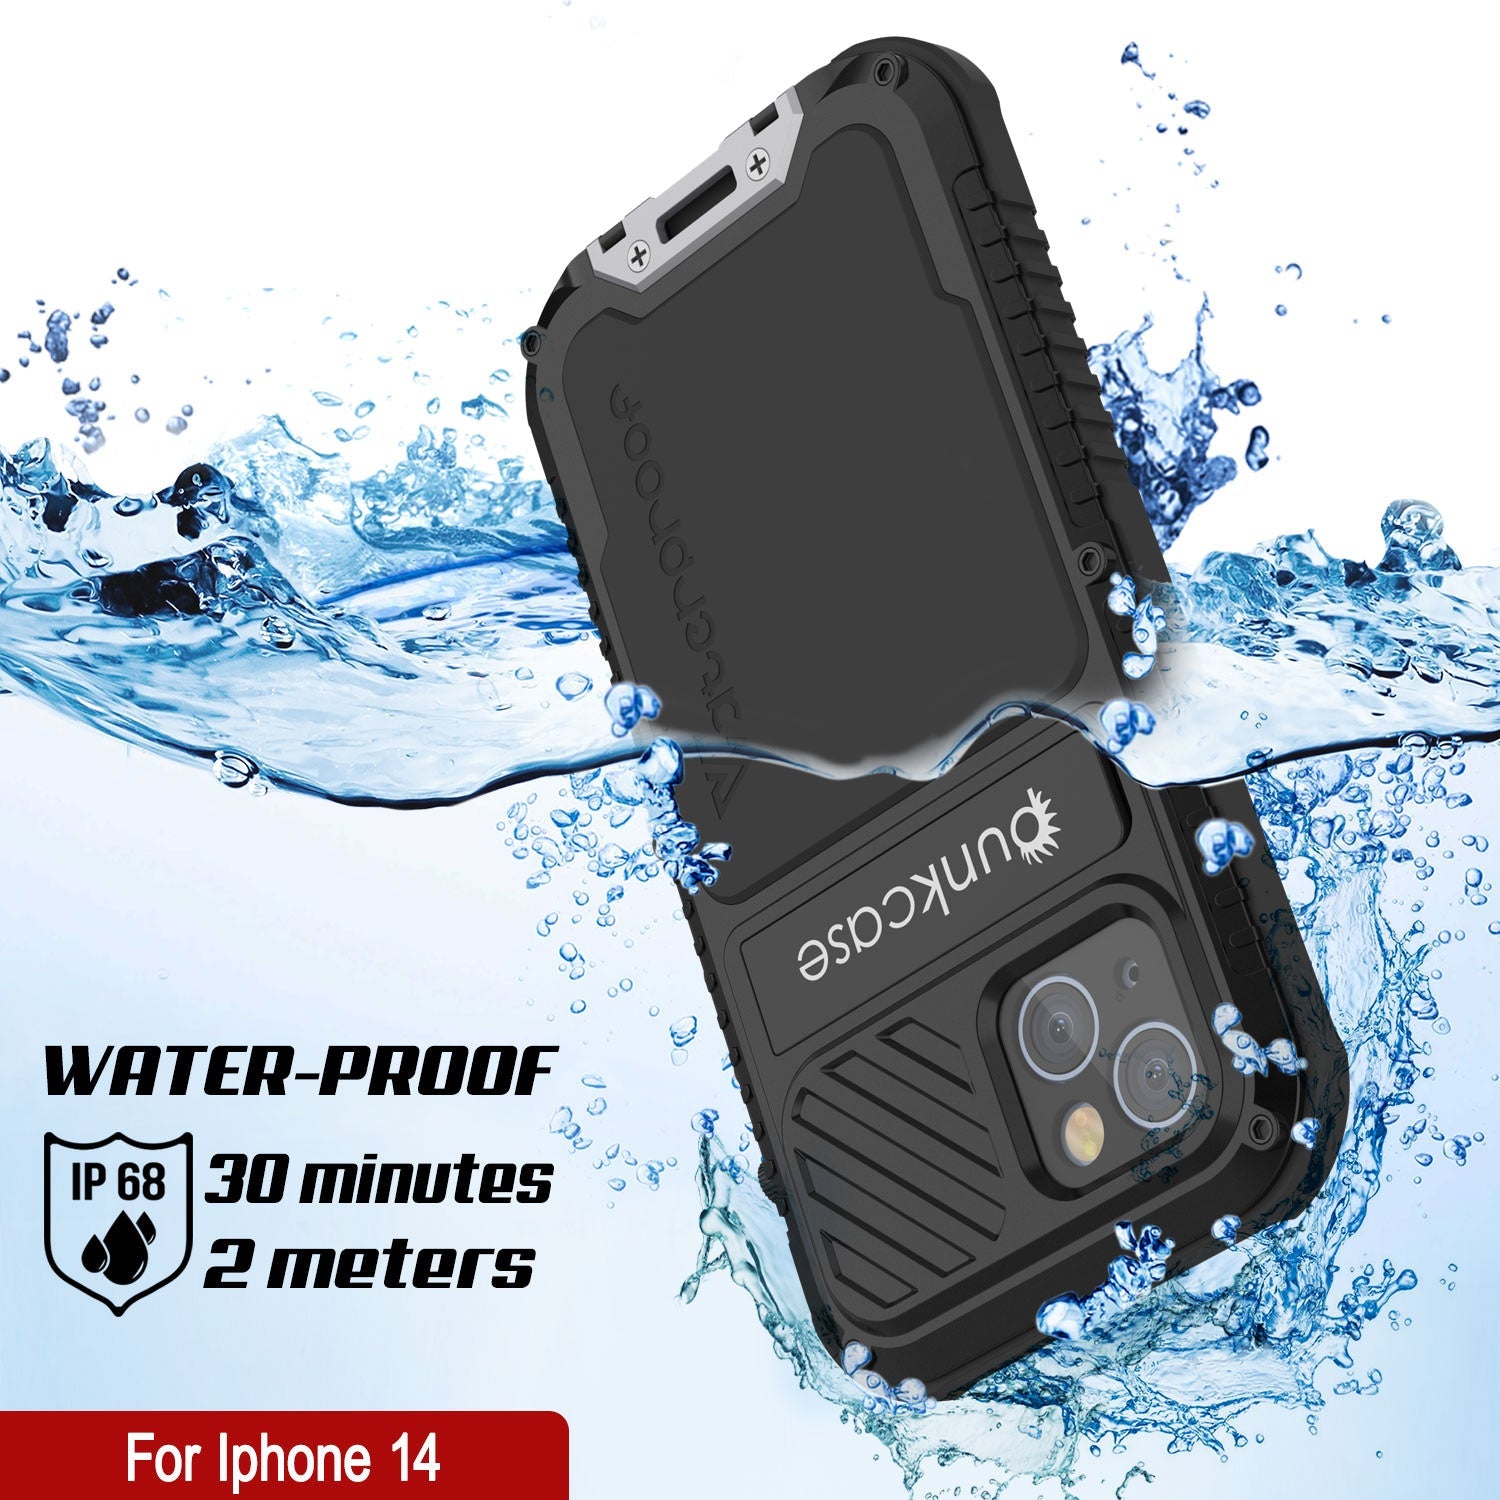 iPhone 14 Metal Extreme 3.0 Case, Heavy Duty Military Grade Armor Cover [shock proof] Waterproof Aluminum Case [Black]